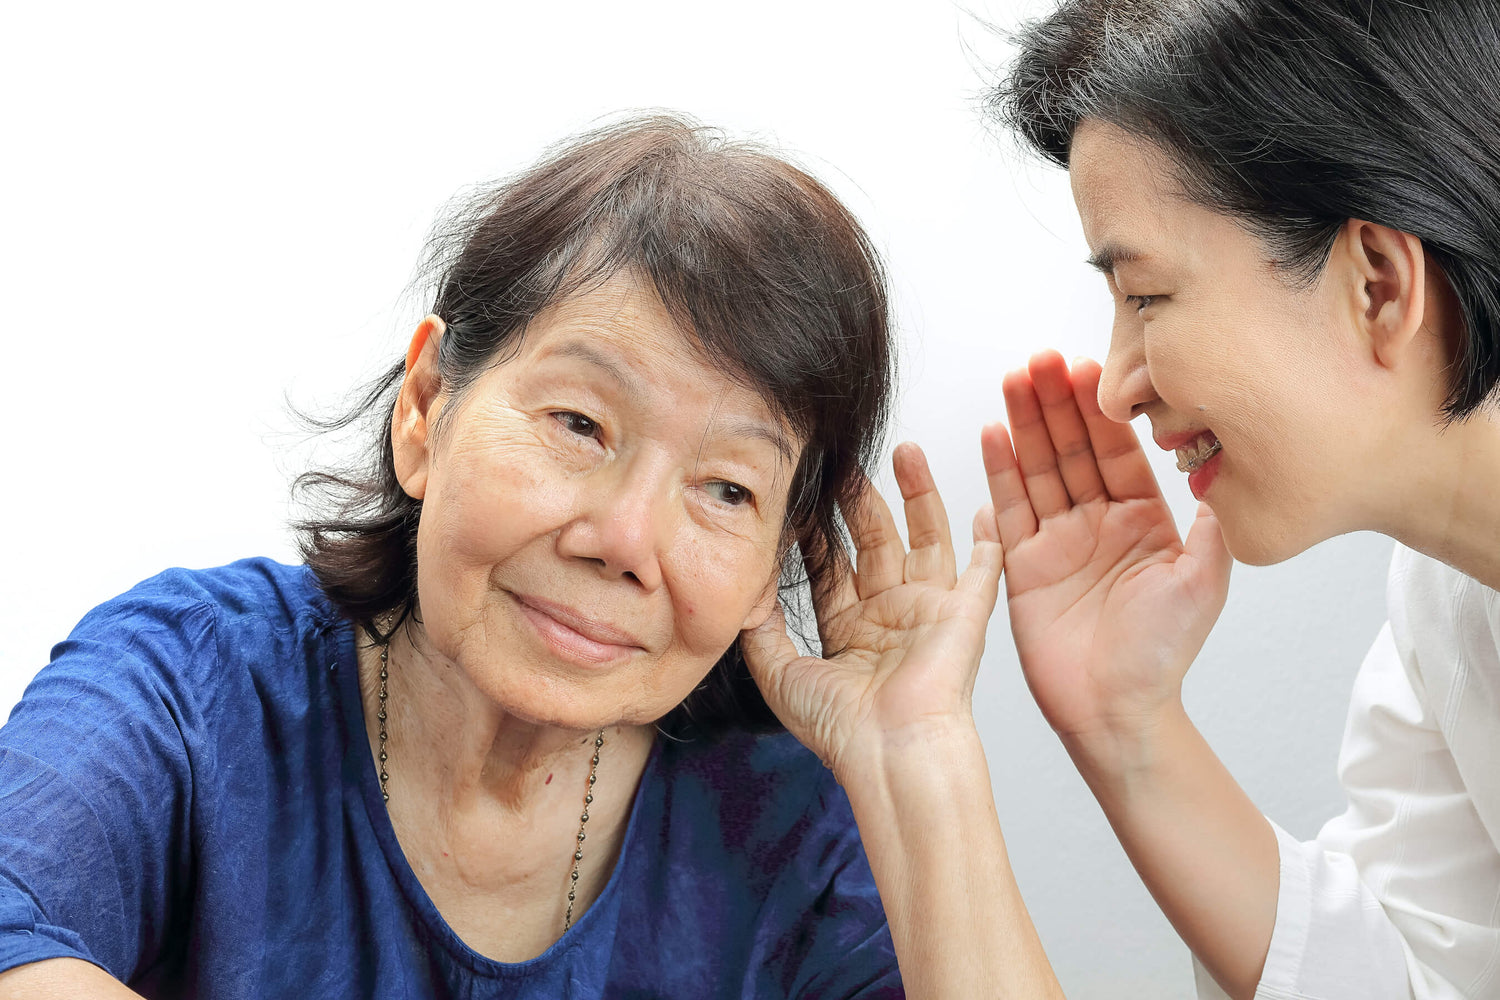 Hearing-impaired receiving hearing care